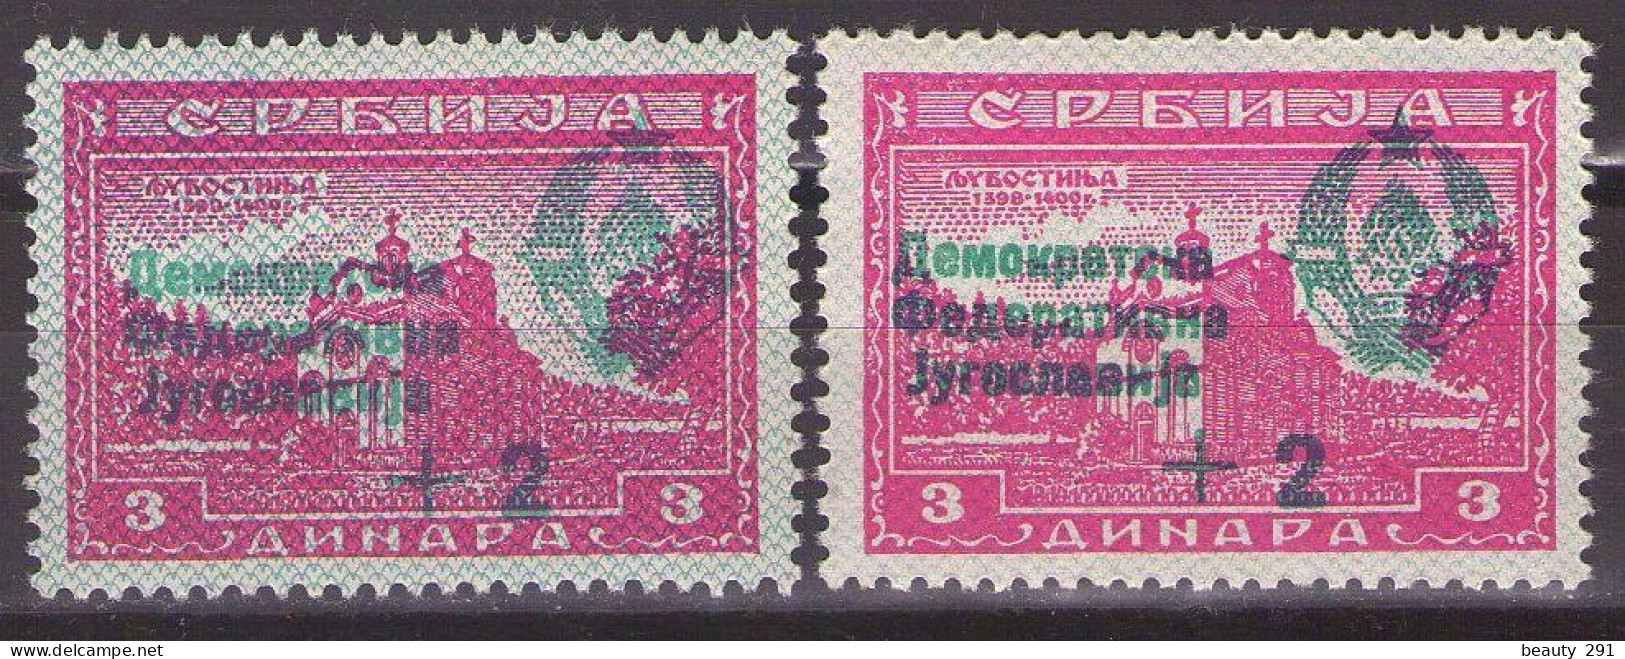 Yugoslavia 1944 Michel 451 I Monasteries With Net -different Color,first Republic Issues - MNH**VF - Ungebraucht